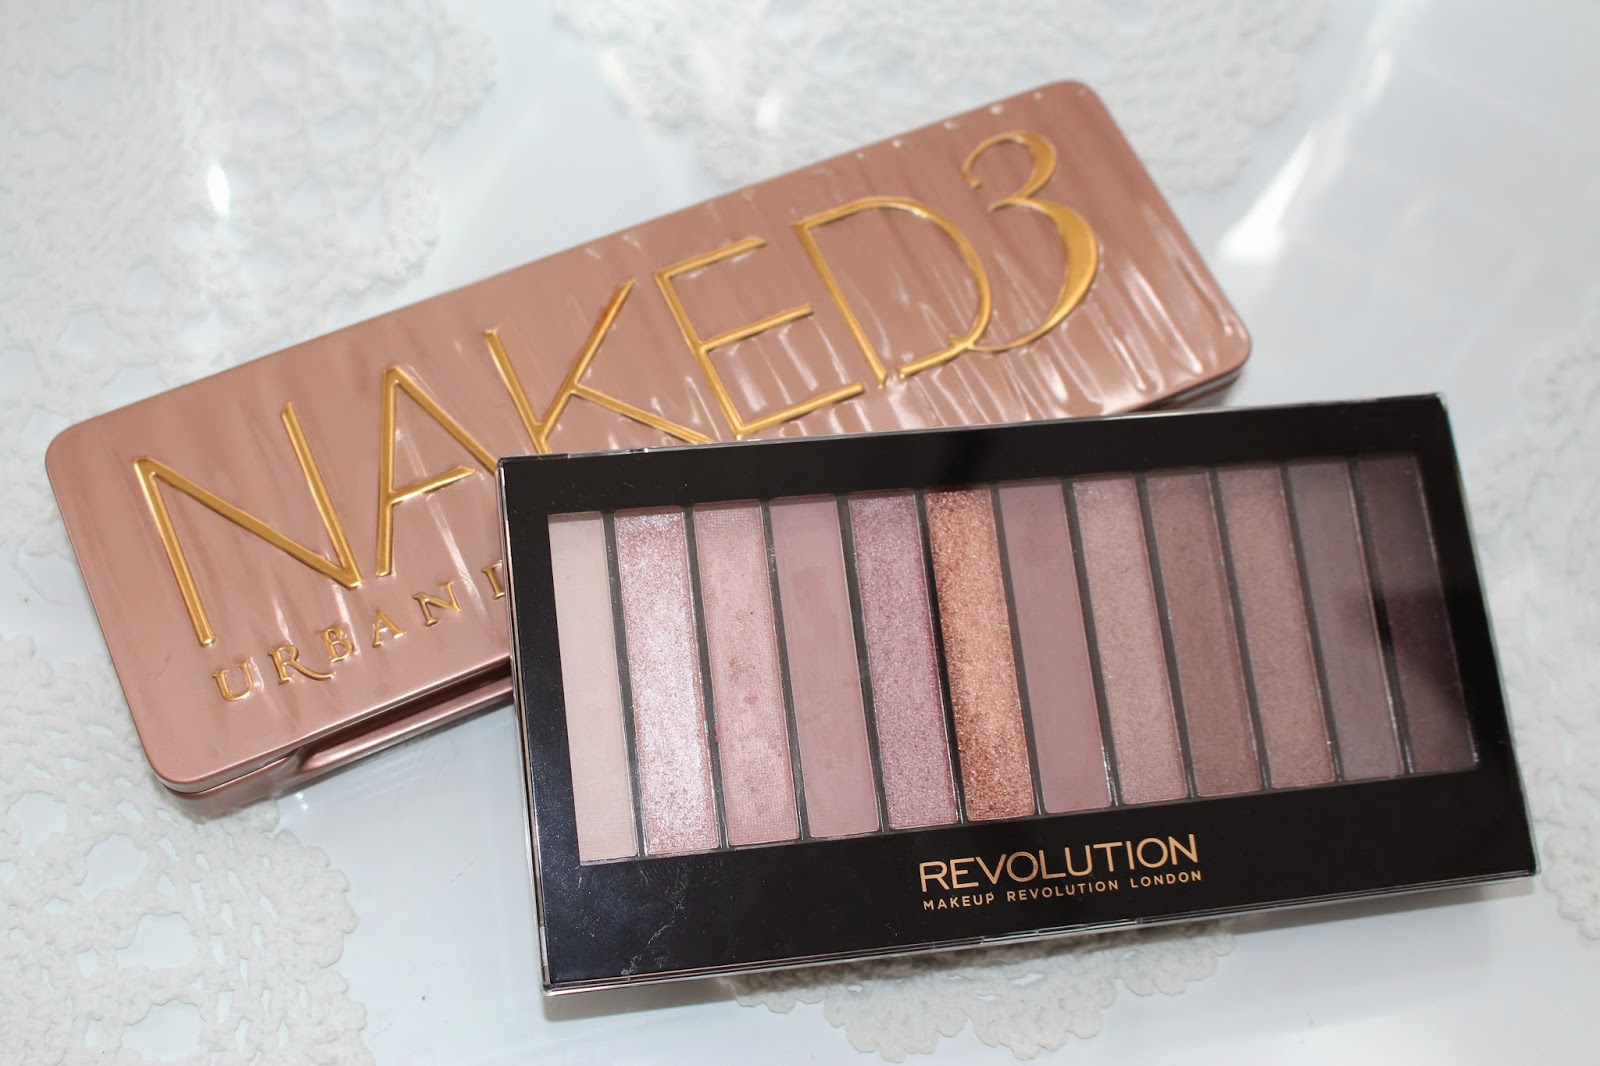 [Review] Urban Decay Naked 3 Eyeshadow Palette